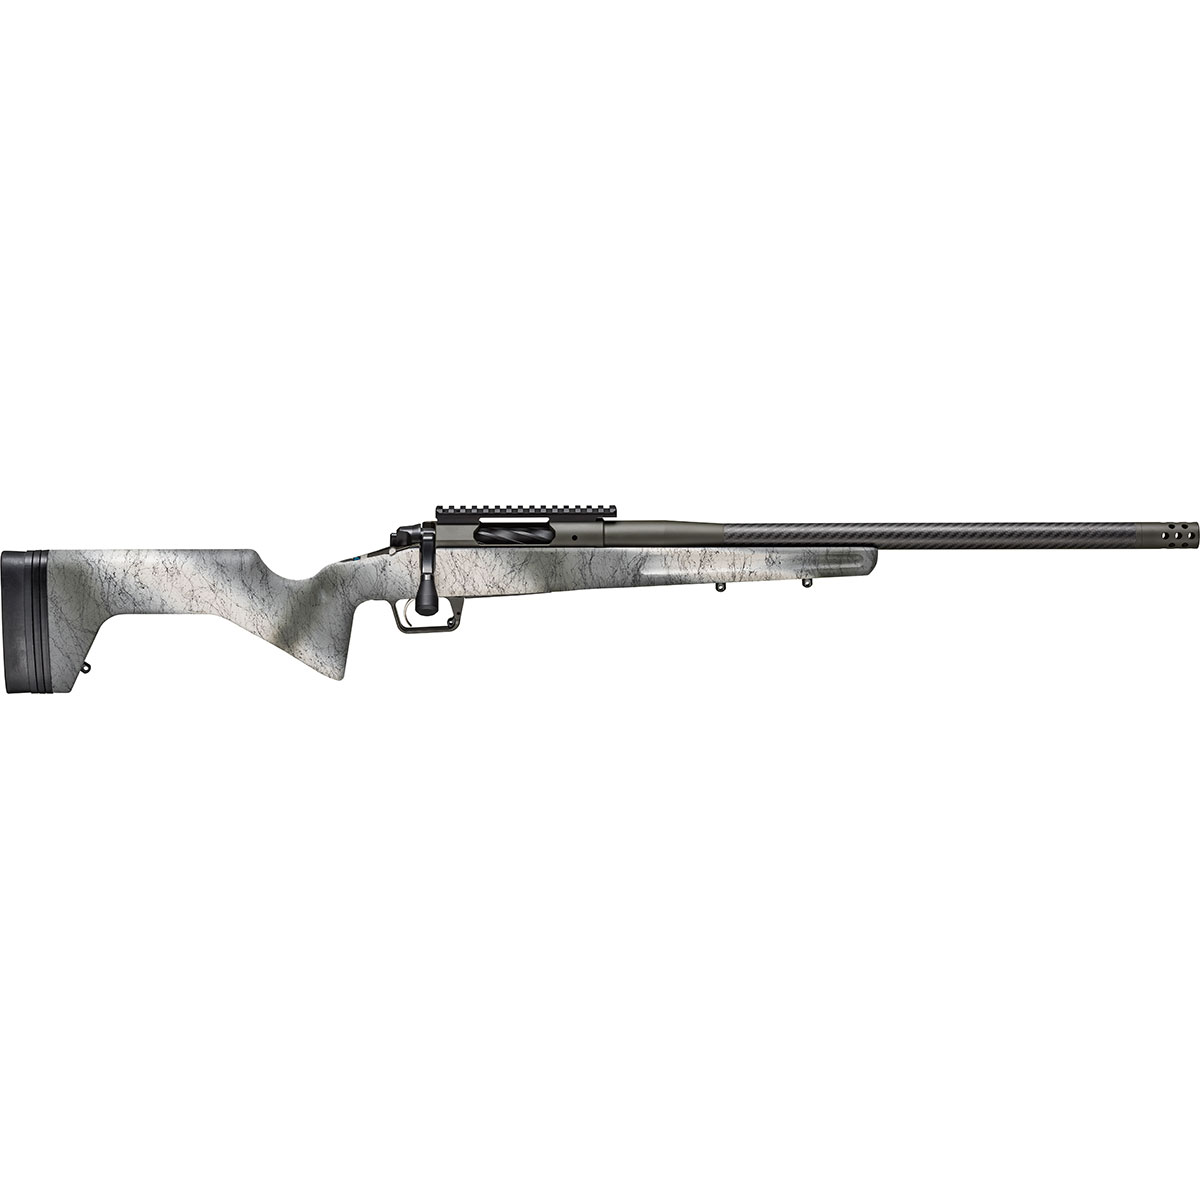 SPRINGFIELD ARMORY - 2020 REDLINE .308 WINCHESTER BOLT ACTION RIFLE